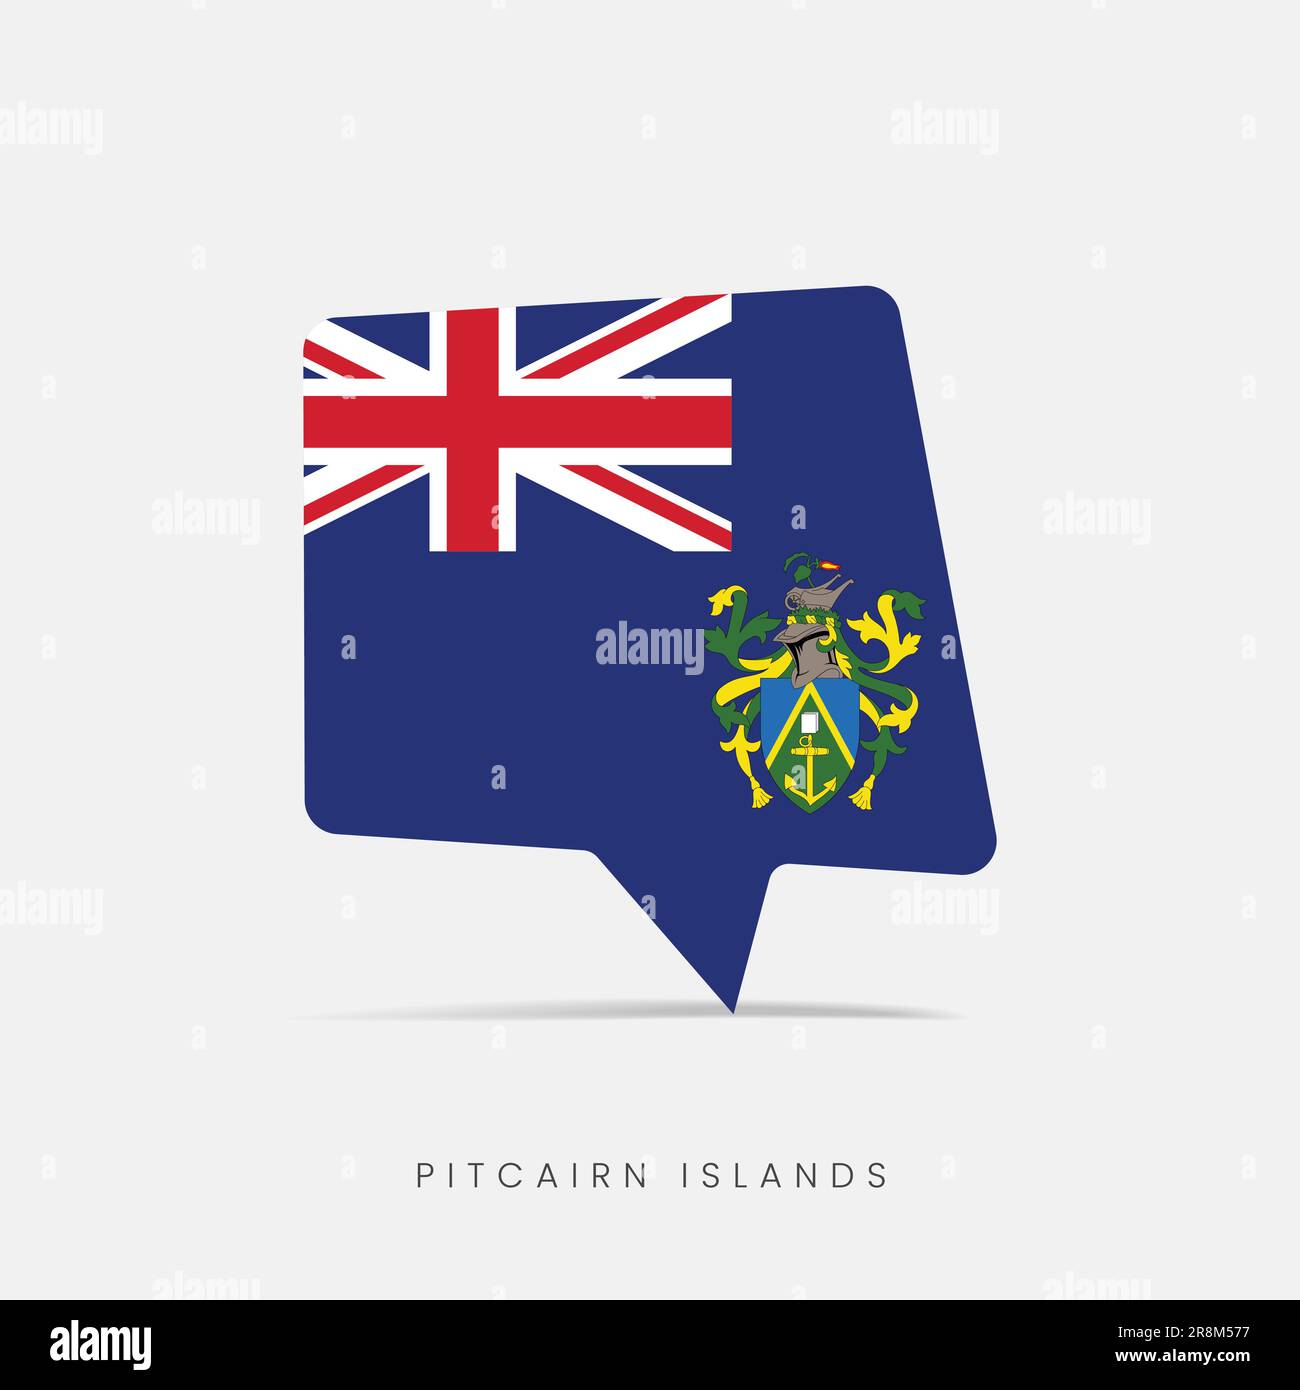 Pitcairn Islands flag bubble chat icon Stock Vector